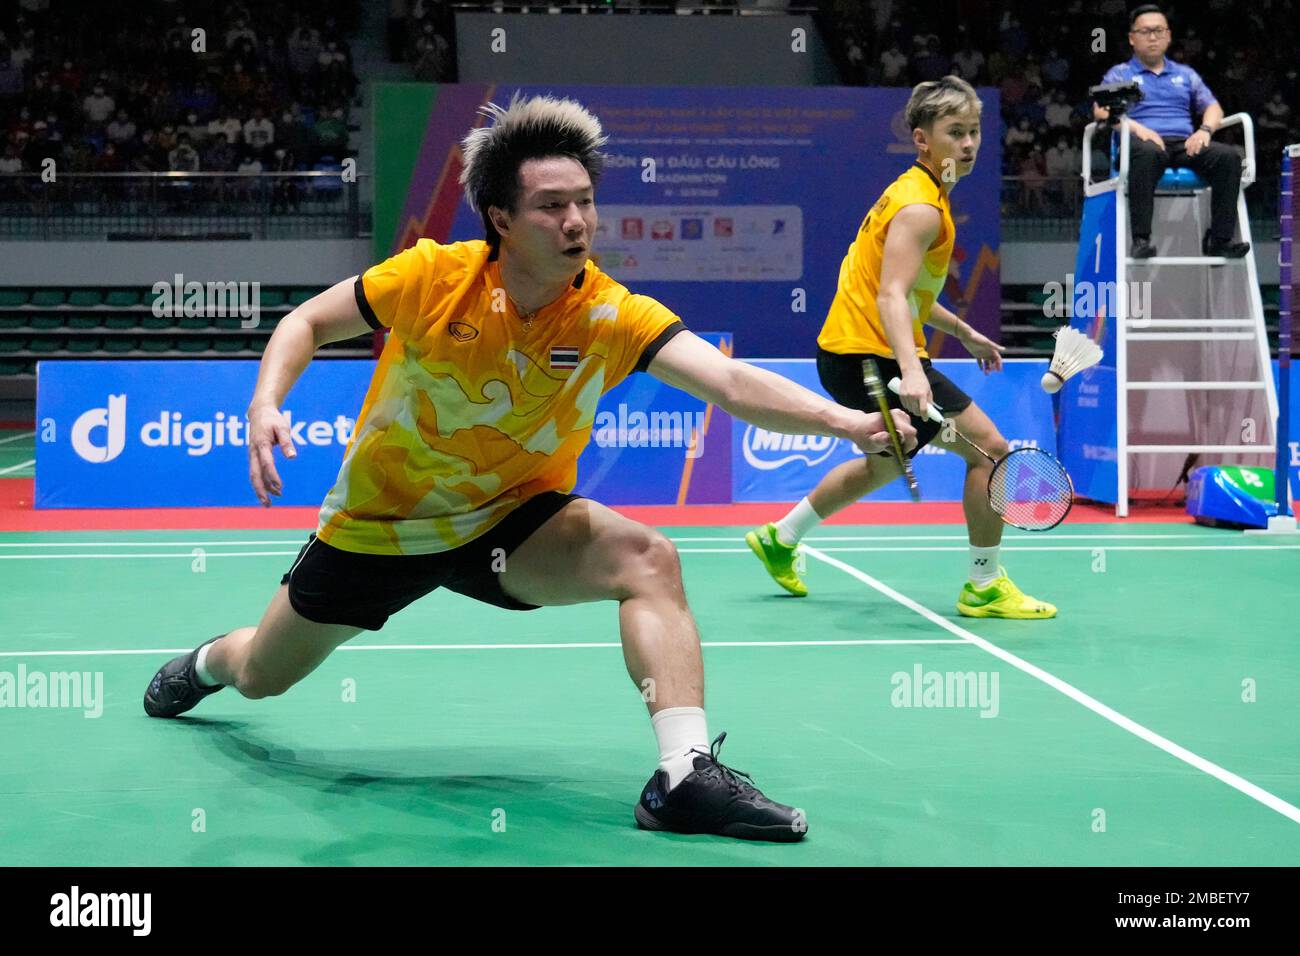 Thailands Chaloempon Charoenkitamorn, right, and Nanthakam Yordphaisong play against Malaysias Man Wei Chong and Tee Kai Wun during their mens team badminton final match at the 31st Southeast Asian Games (SEA Games),